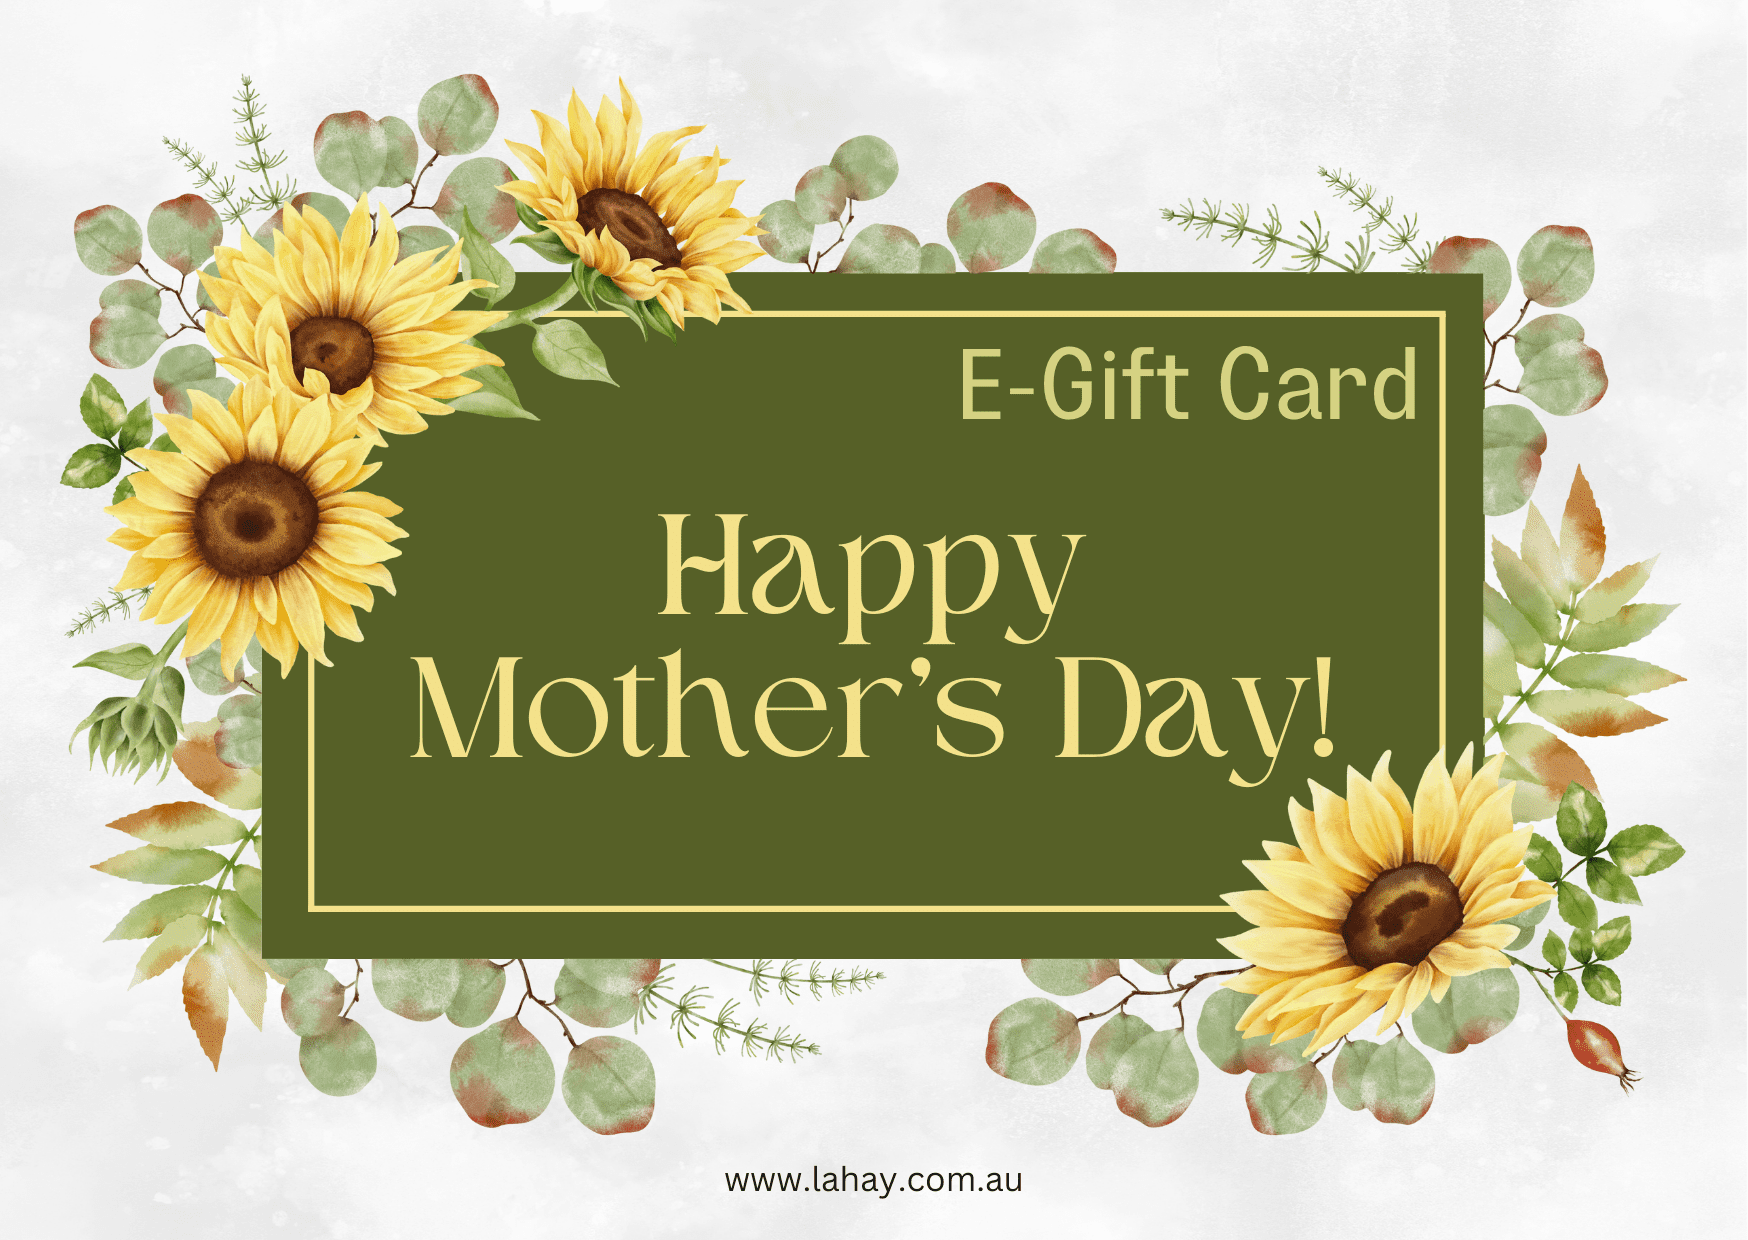 Mother's Day E-Gift Card- Sunflowers